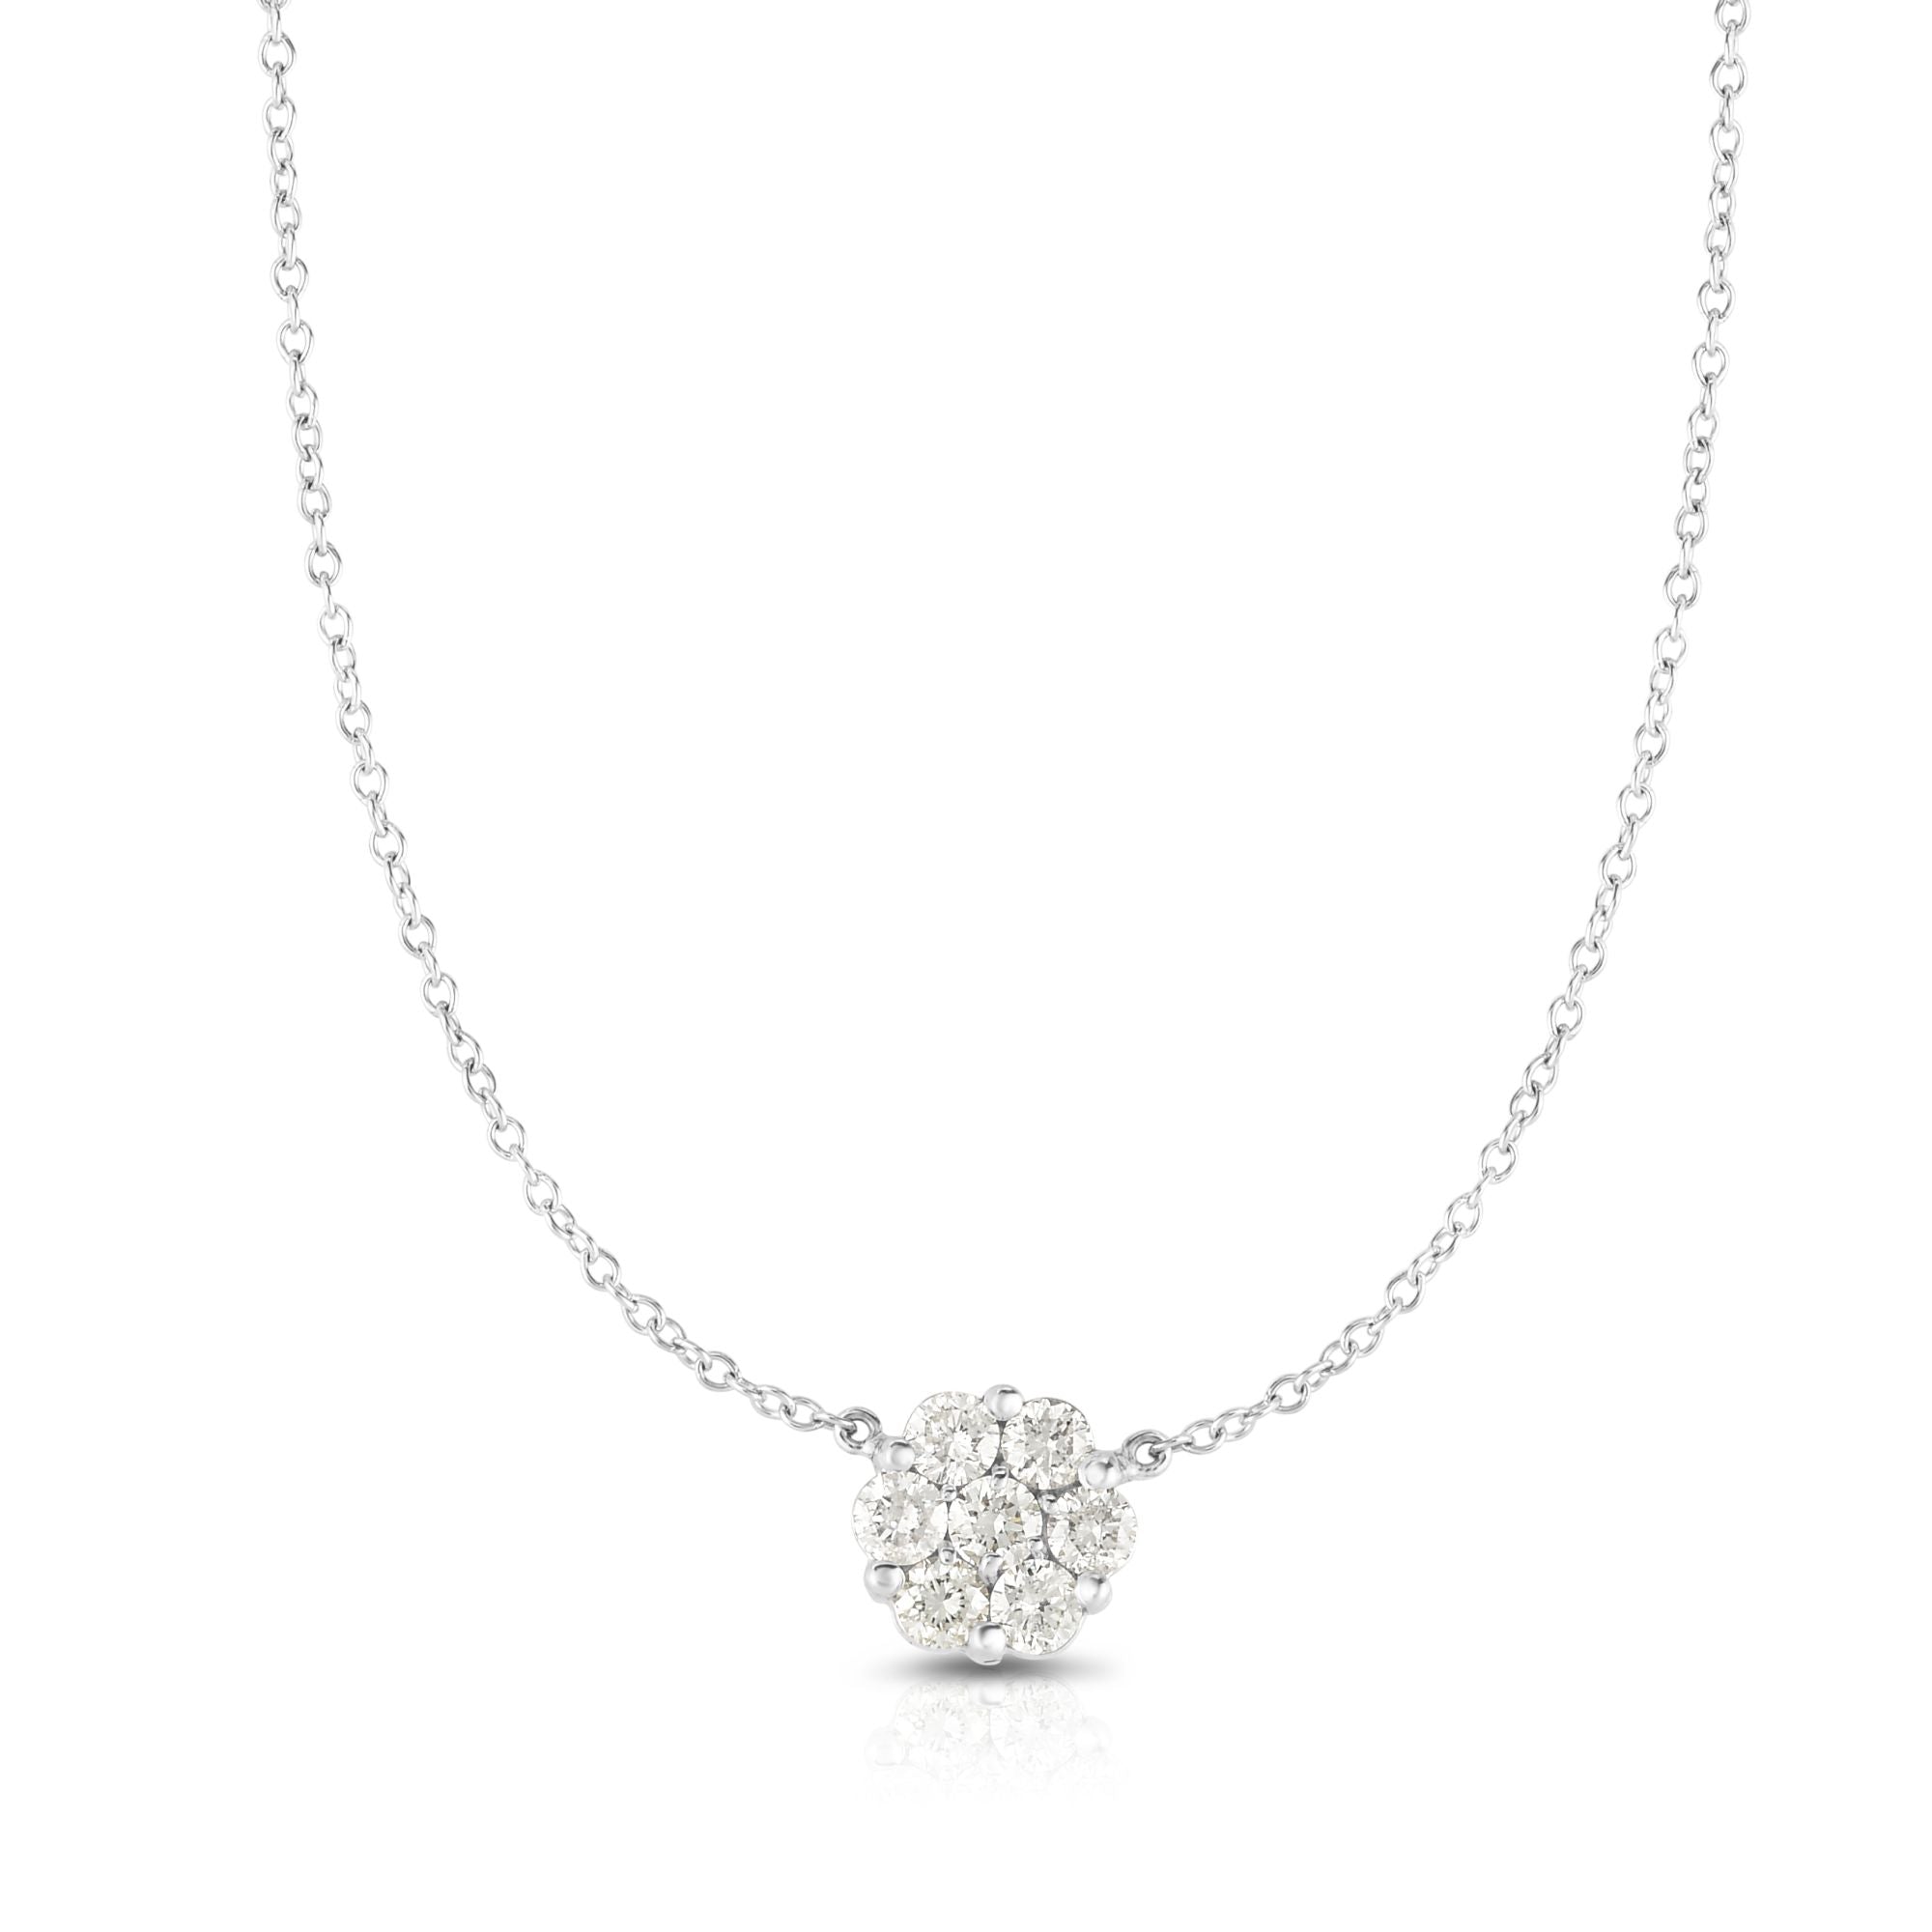 14k White Gold Floral Diamond Cluster Necklace 0.50ct